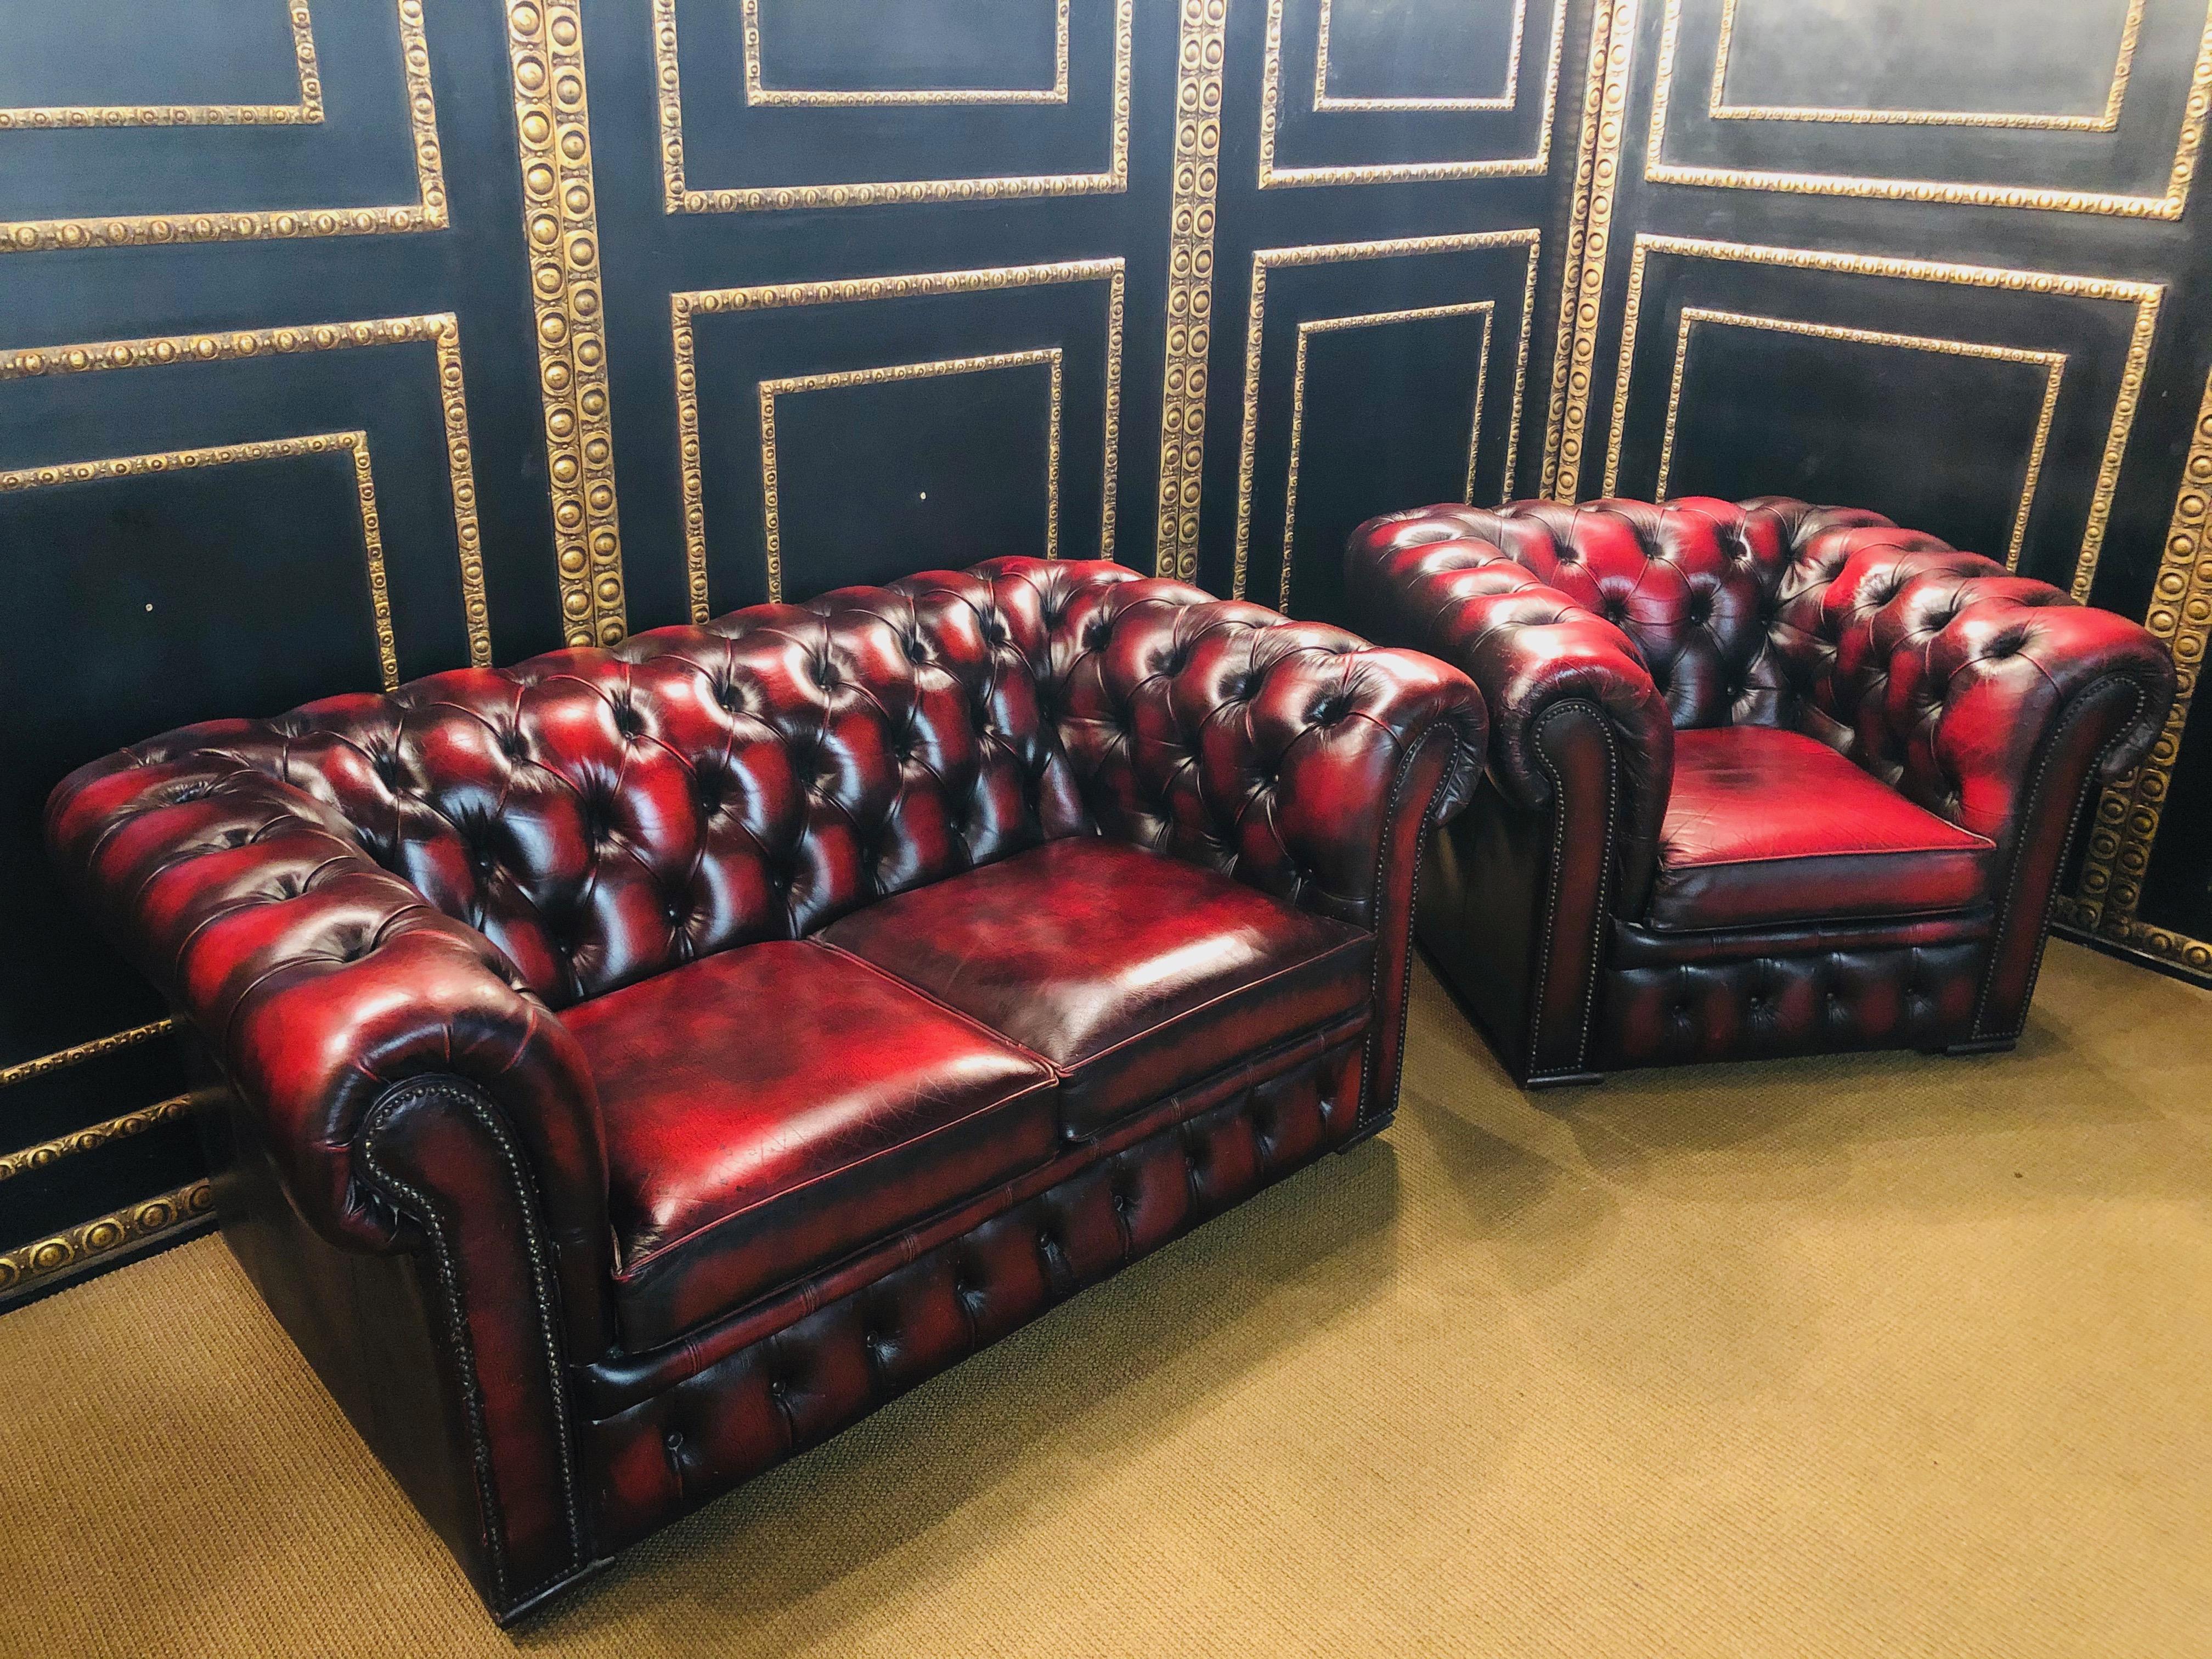 The elegant design suits every interior. Thanks to the typical upholstered buttons, this set goes well with all Classic furnishings. Since it is completely covered with real leather, you can show it off freely in the room as you wish.

Very sturdy